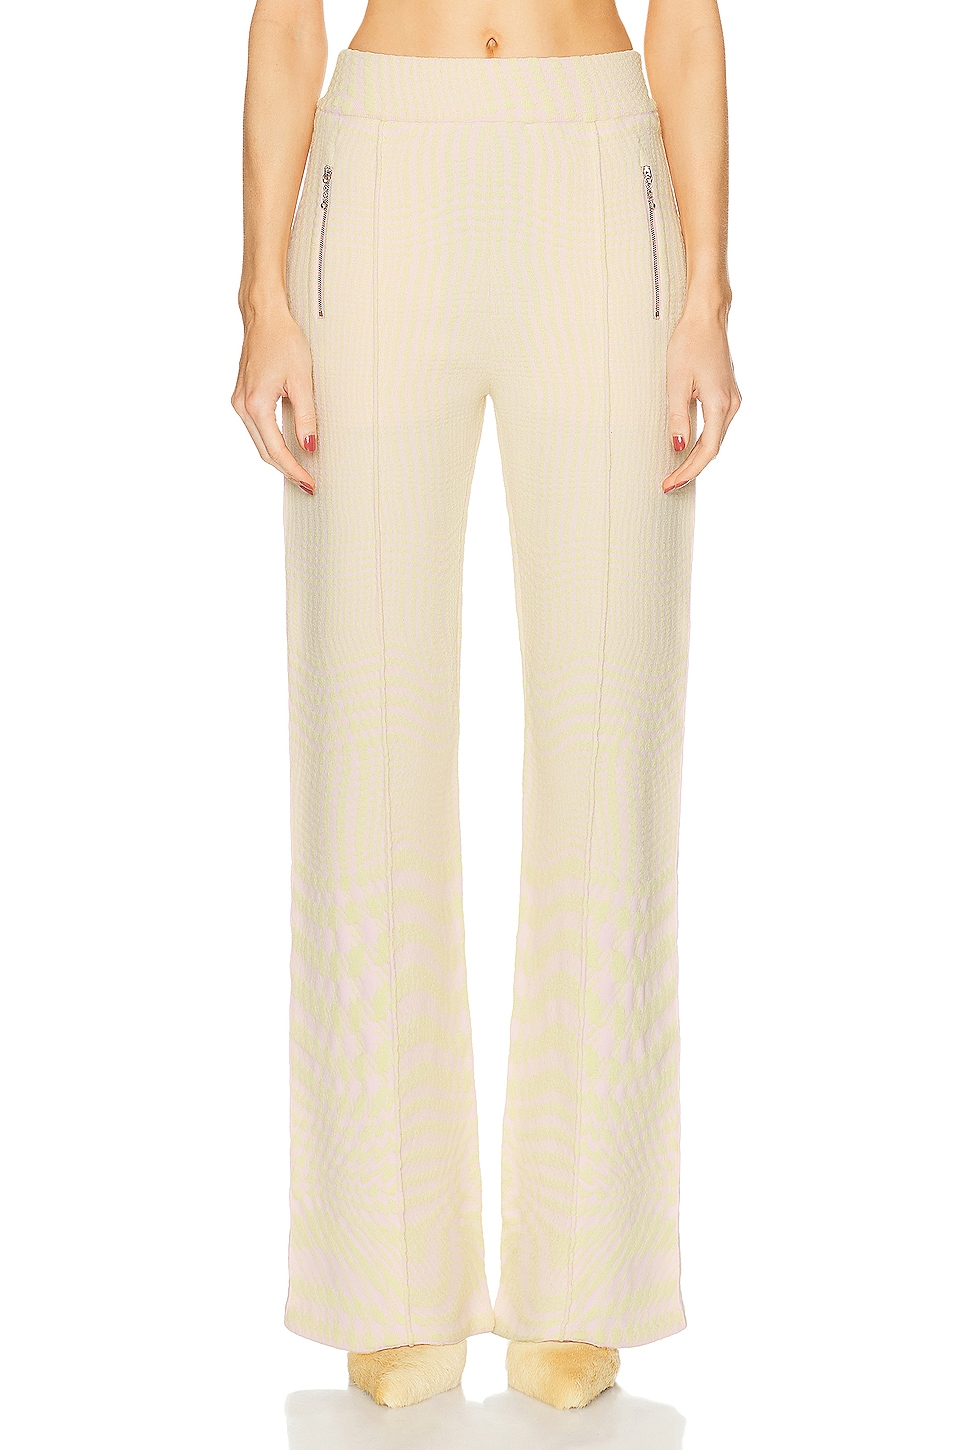 Image 1 of Burberry Zipper Pocket Trouser in Cameo IP Pattern